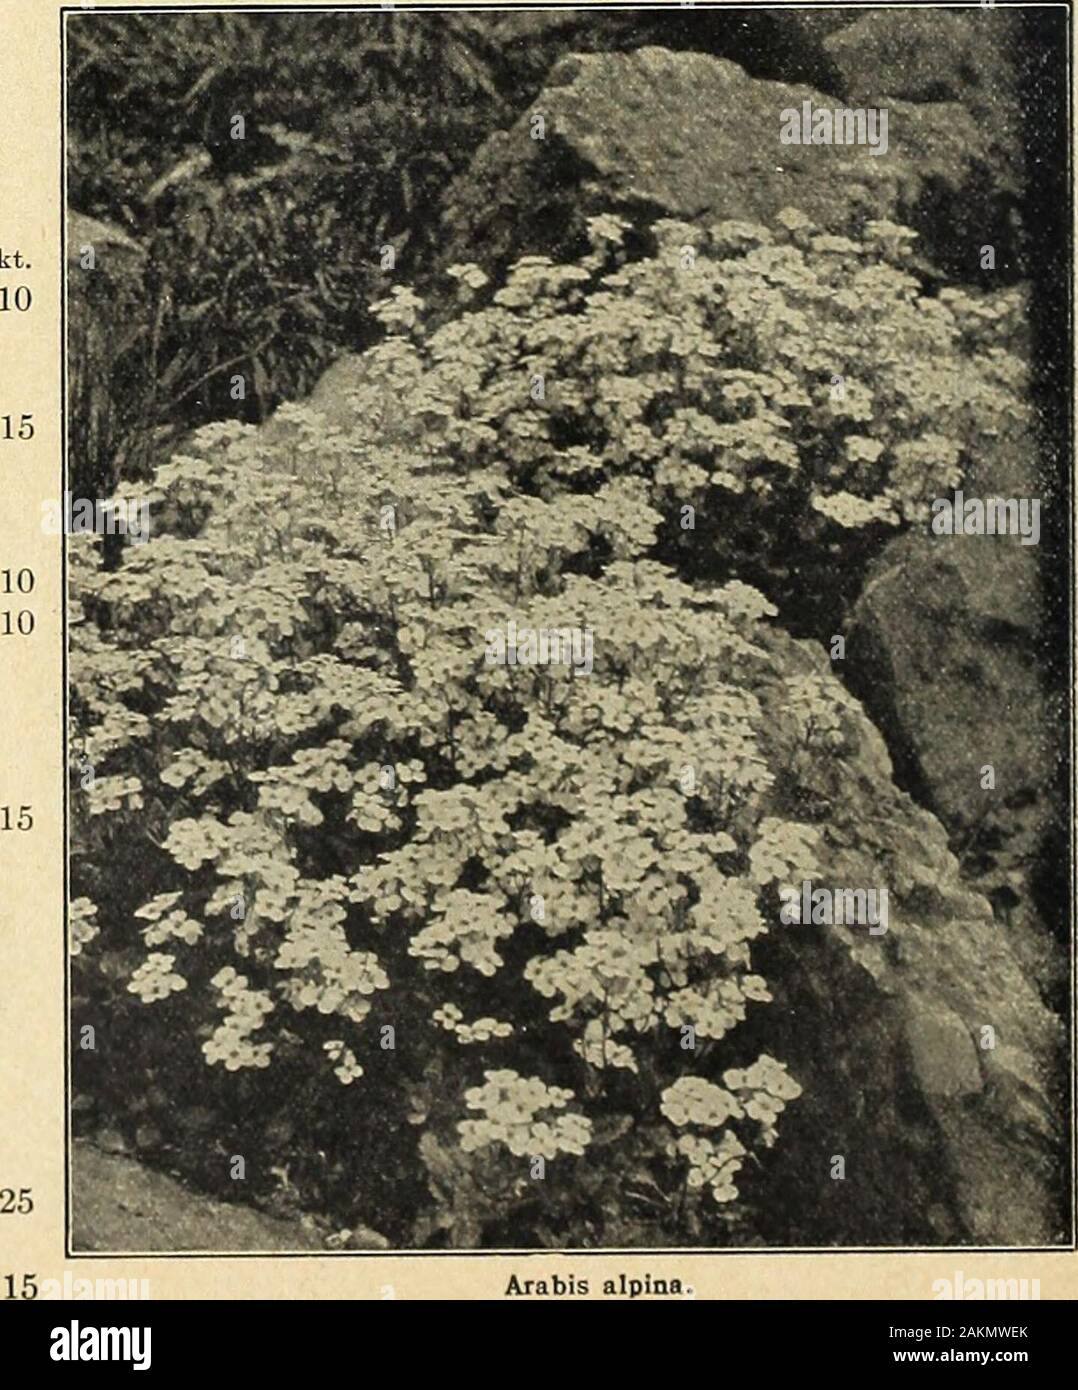 Farquhar's garden annual : 1918 . reepingvariety, smothered with dainty white flowers in early Sum-mer. Valuable plant for the rock garden. J oz., .75; Pkt..10 .15 ARMERIA Maritima. (Thriftor Sea Pink.) A pretty edgingplant with deep pink flowers; May to September. 1 ft. ioz., .60; .10Plantaginea. Bright rosy-pink i oz., .60; .10 6145 ASCLEPIAS tuberosa. (Butterfly-weed.) One of the finestnative perennials with compact umbels of brilliant orange-red flowers. Invaluable for border or shrubbery groups;July and August. 2 ft. . ... ... i oz., .50; 6155 ASPERULA Odorata. (&lt;Sweci TT^oodrw^.) Pret Stock Photo